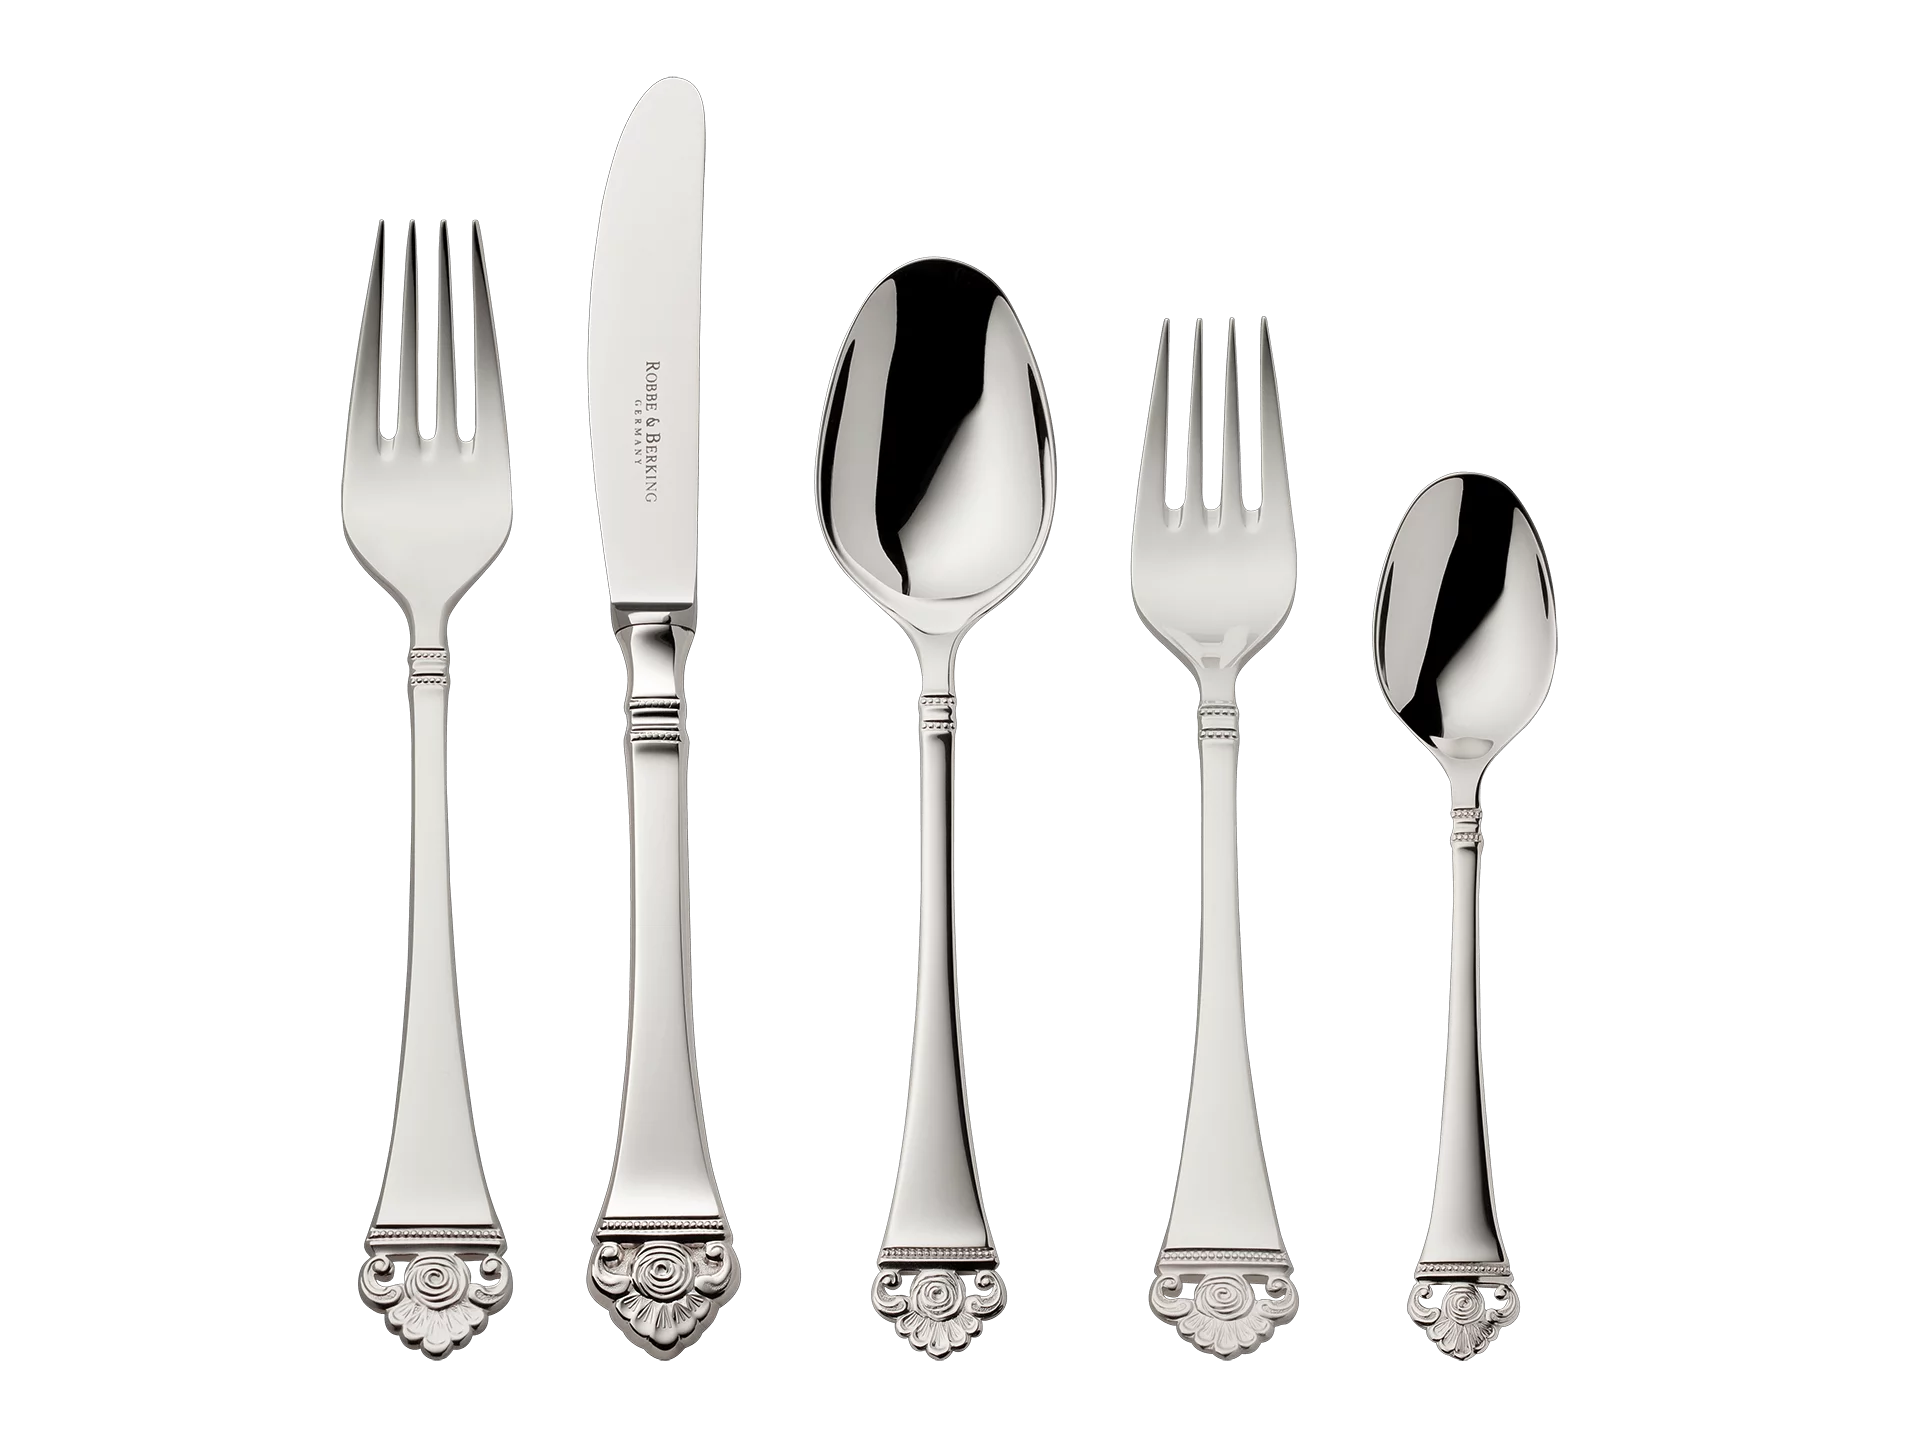 Rosenmuster 5-piece place setting (150g massive silverplated)